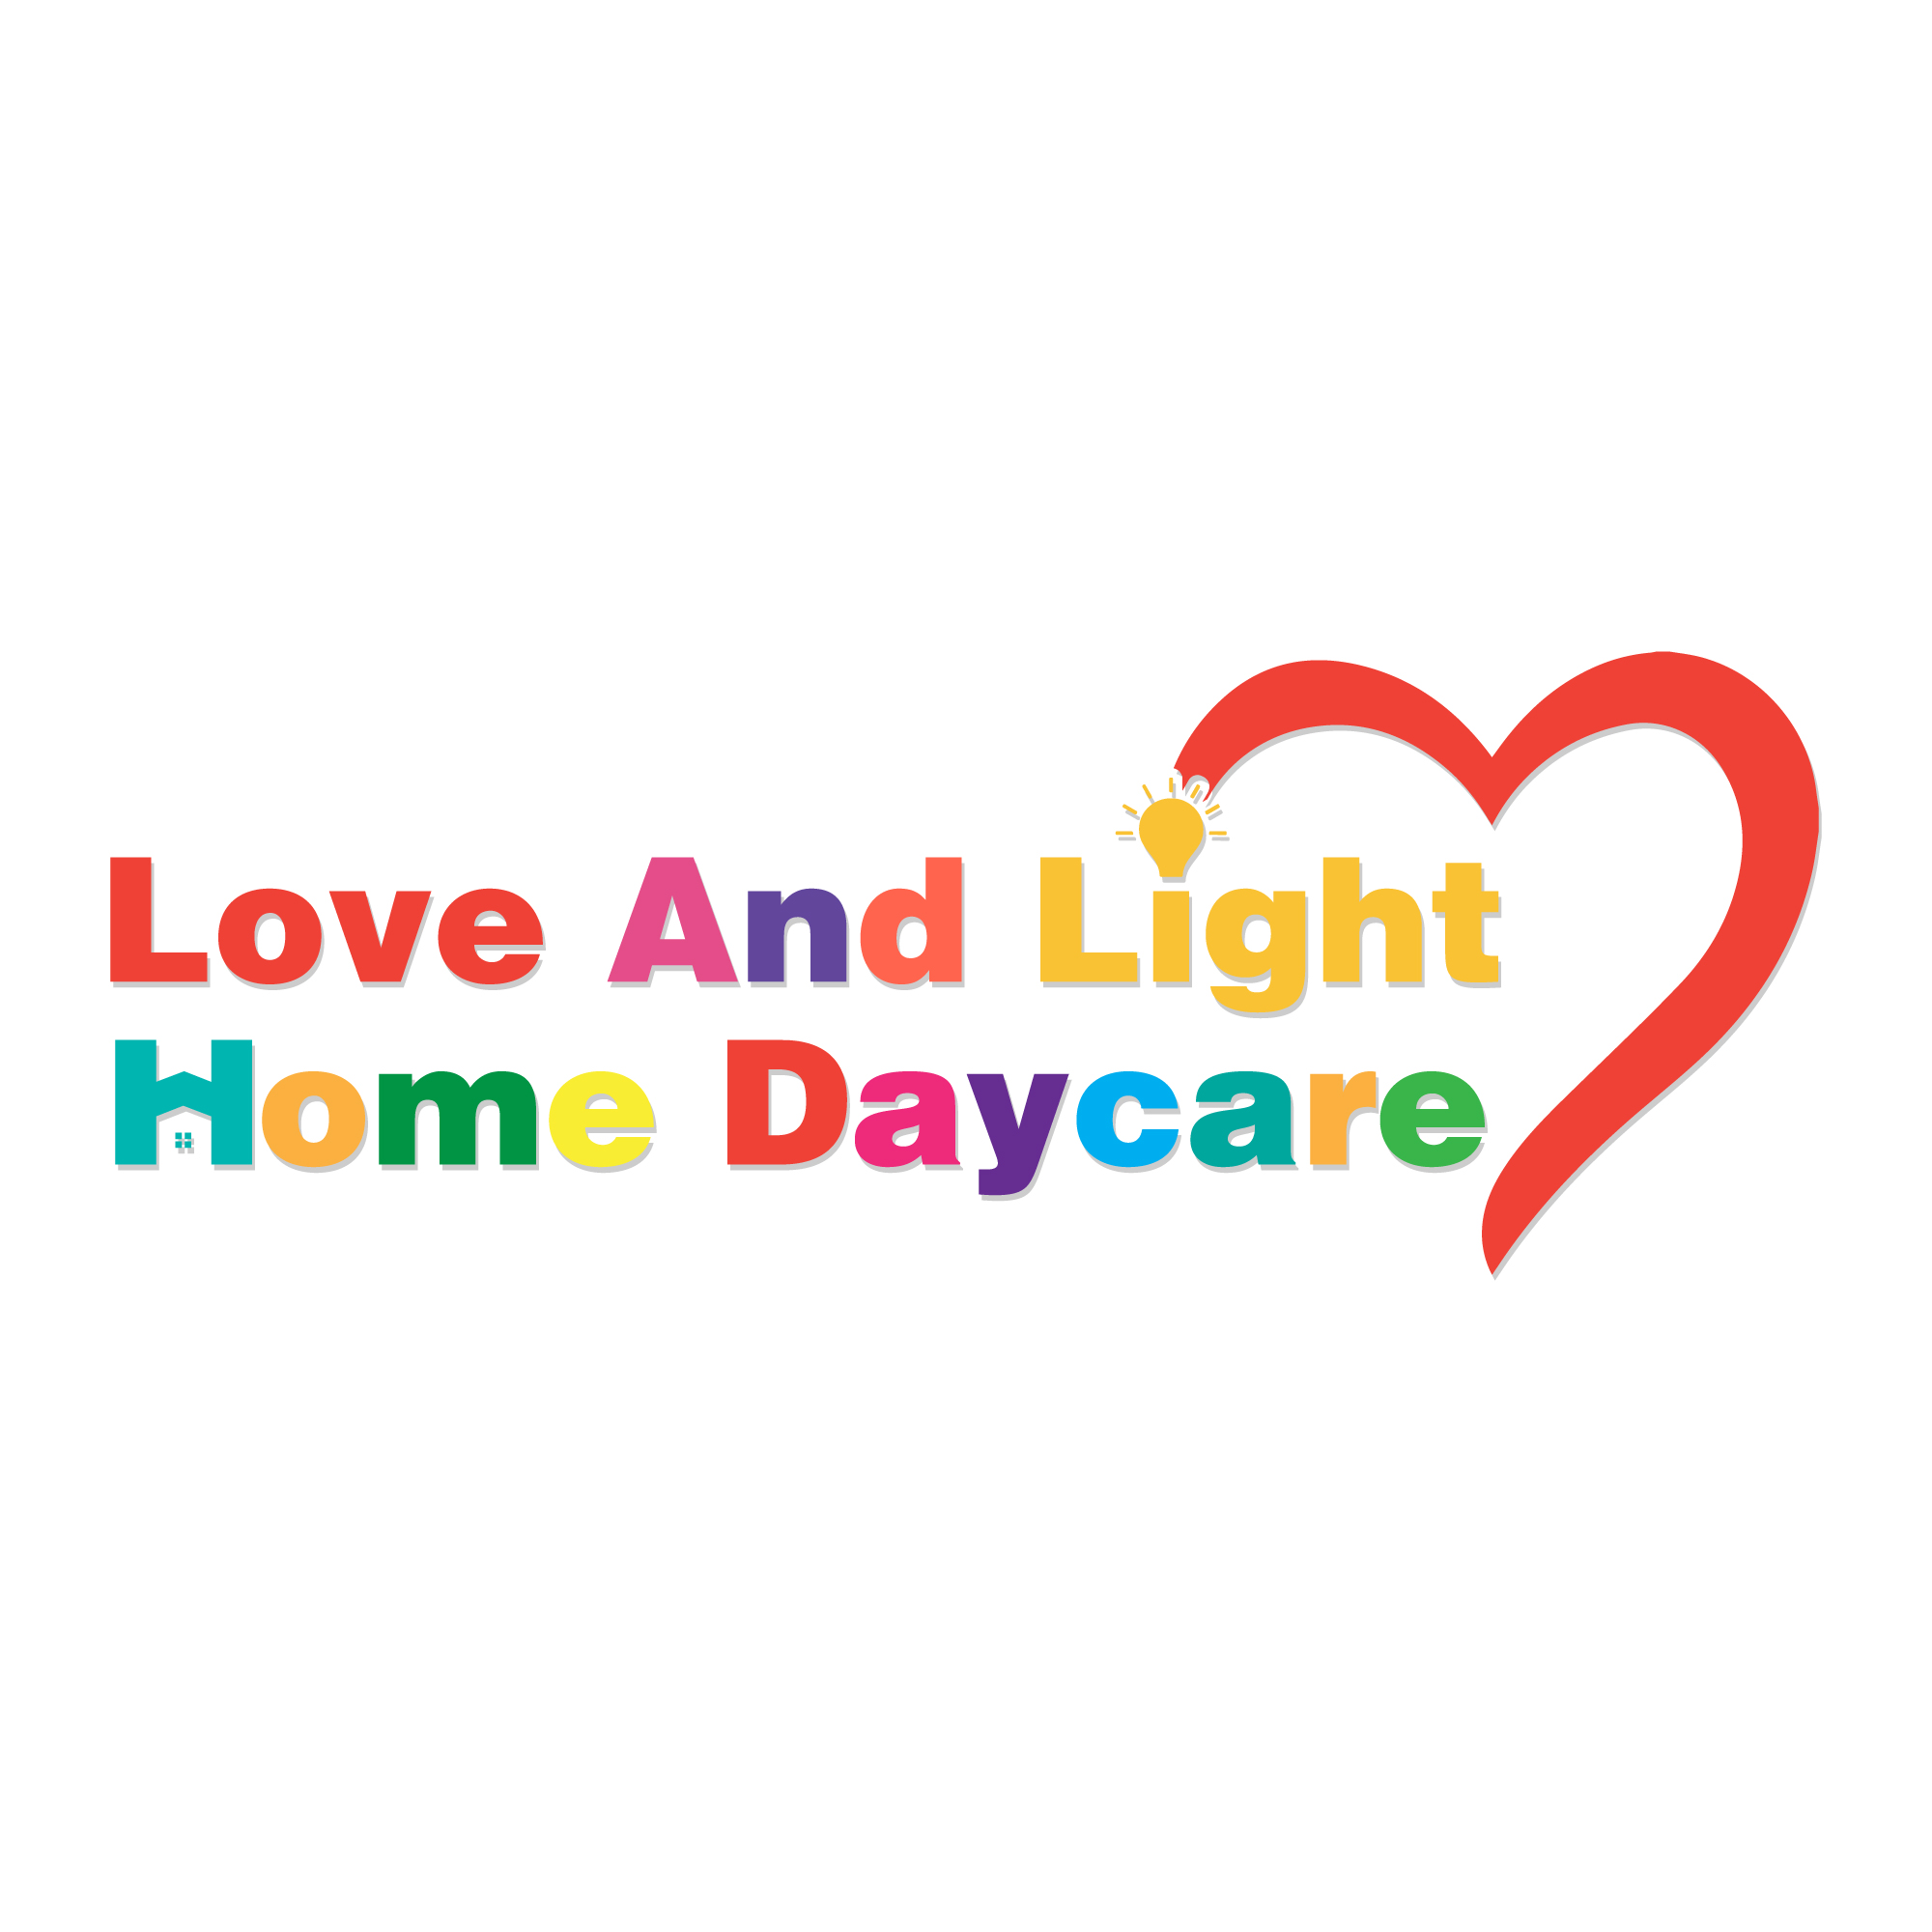 Love and Light Home Daycare